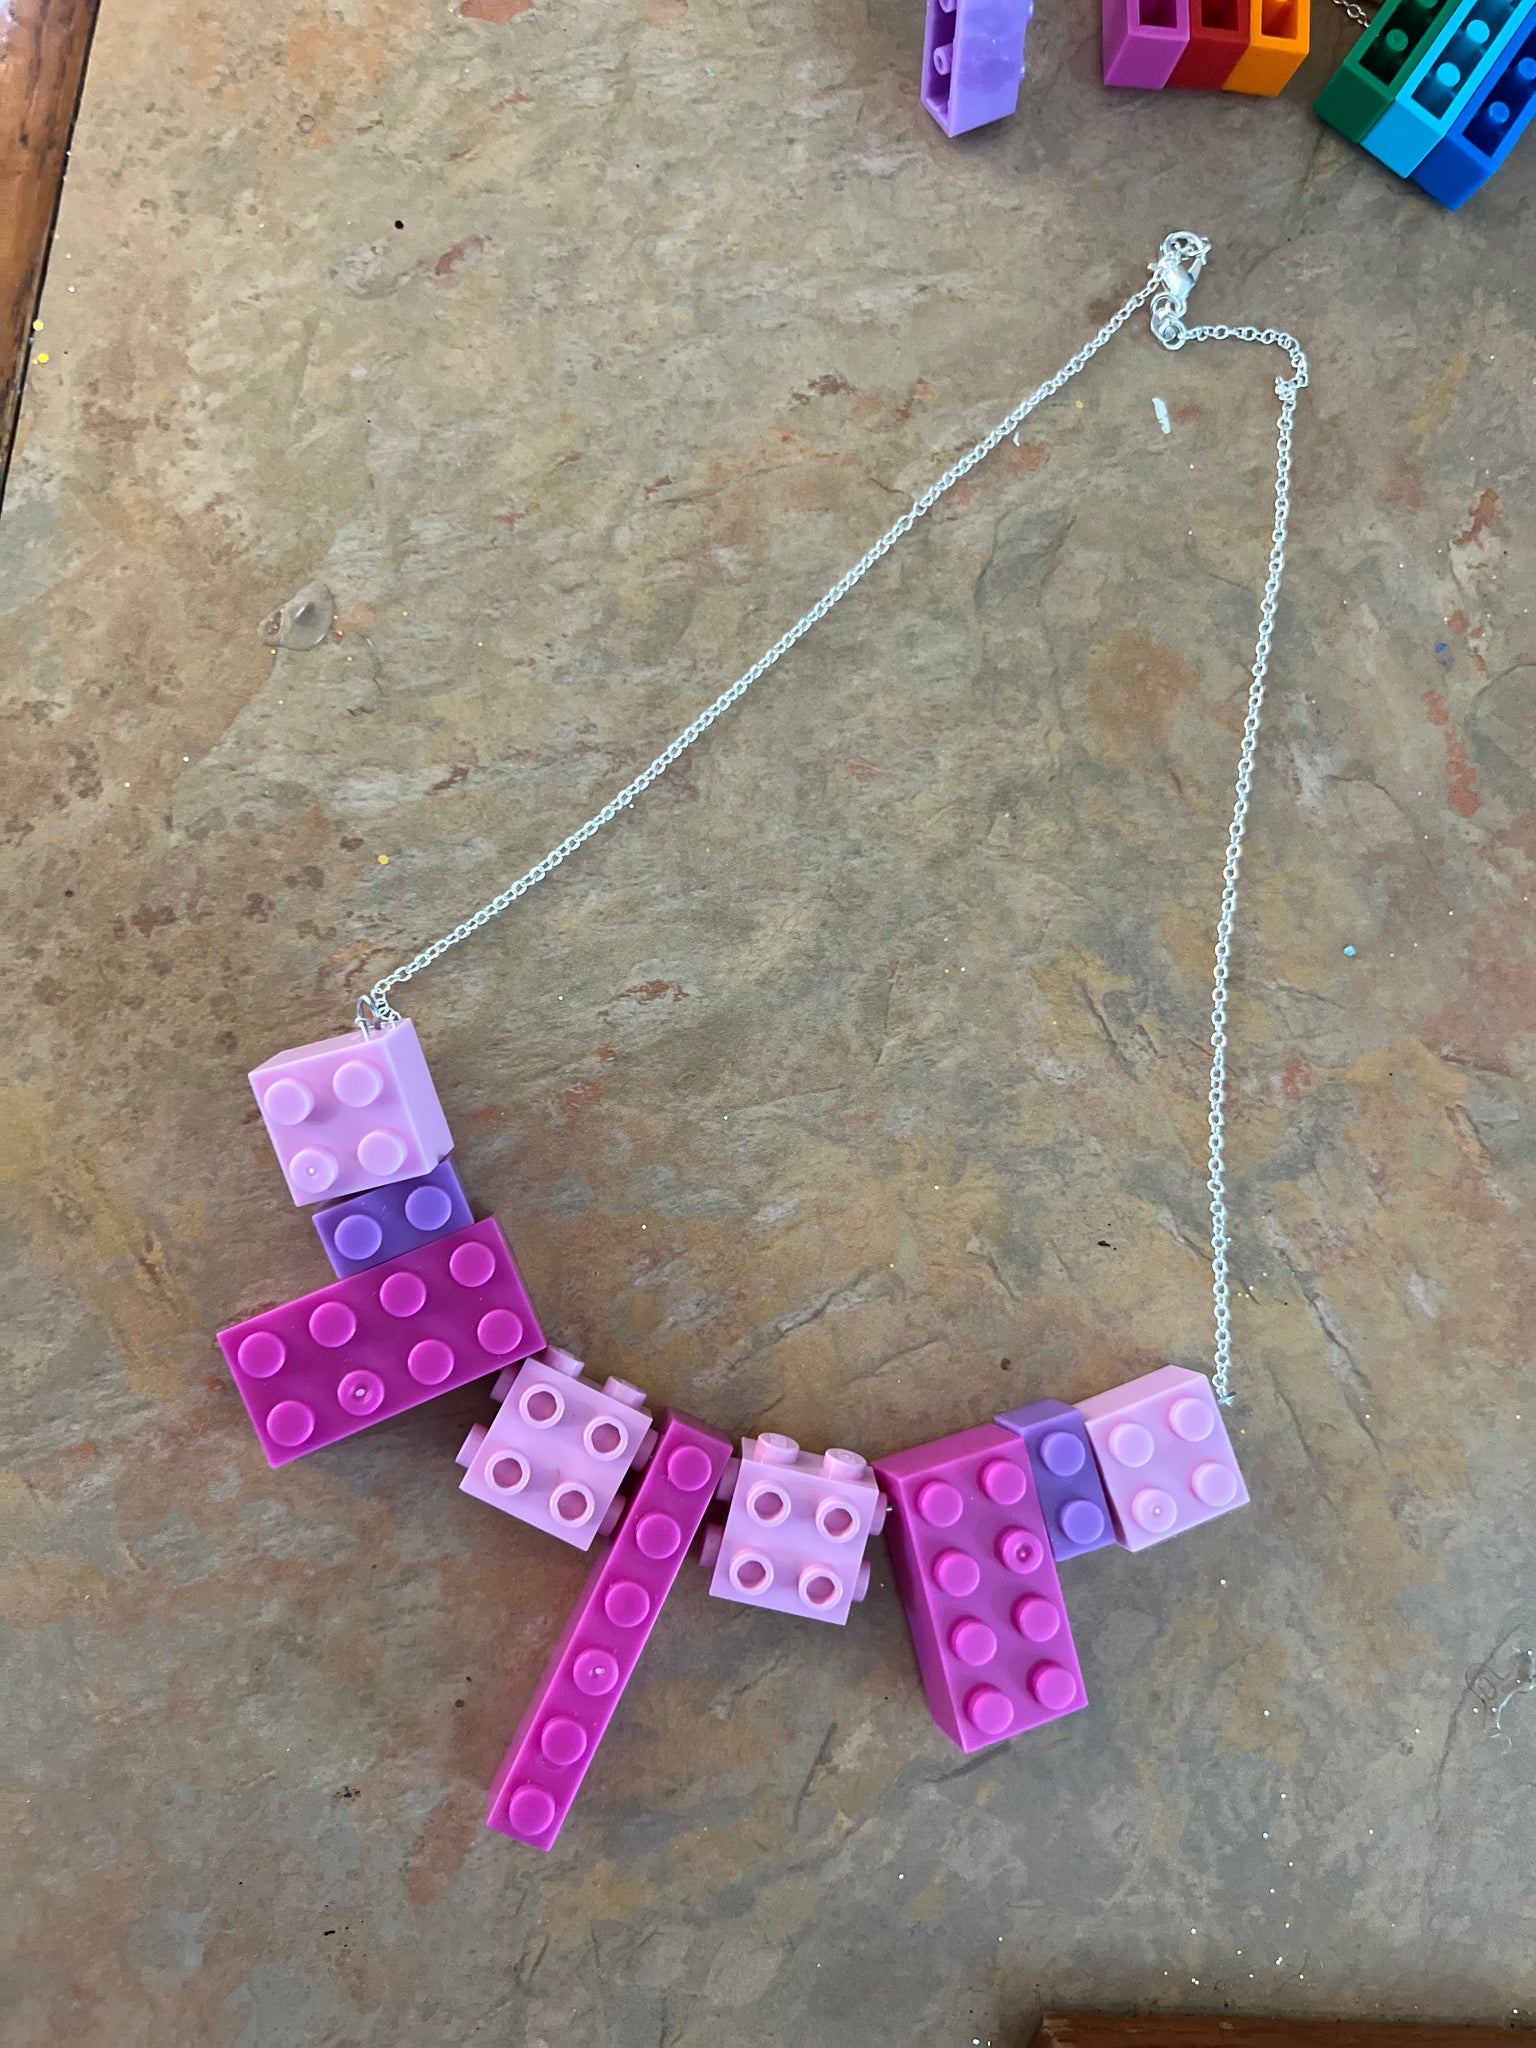 Lego necklace silver chain pink hues